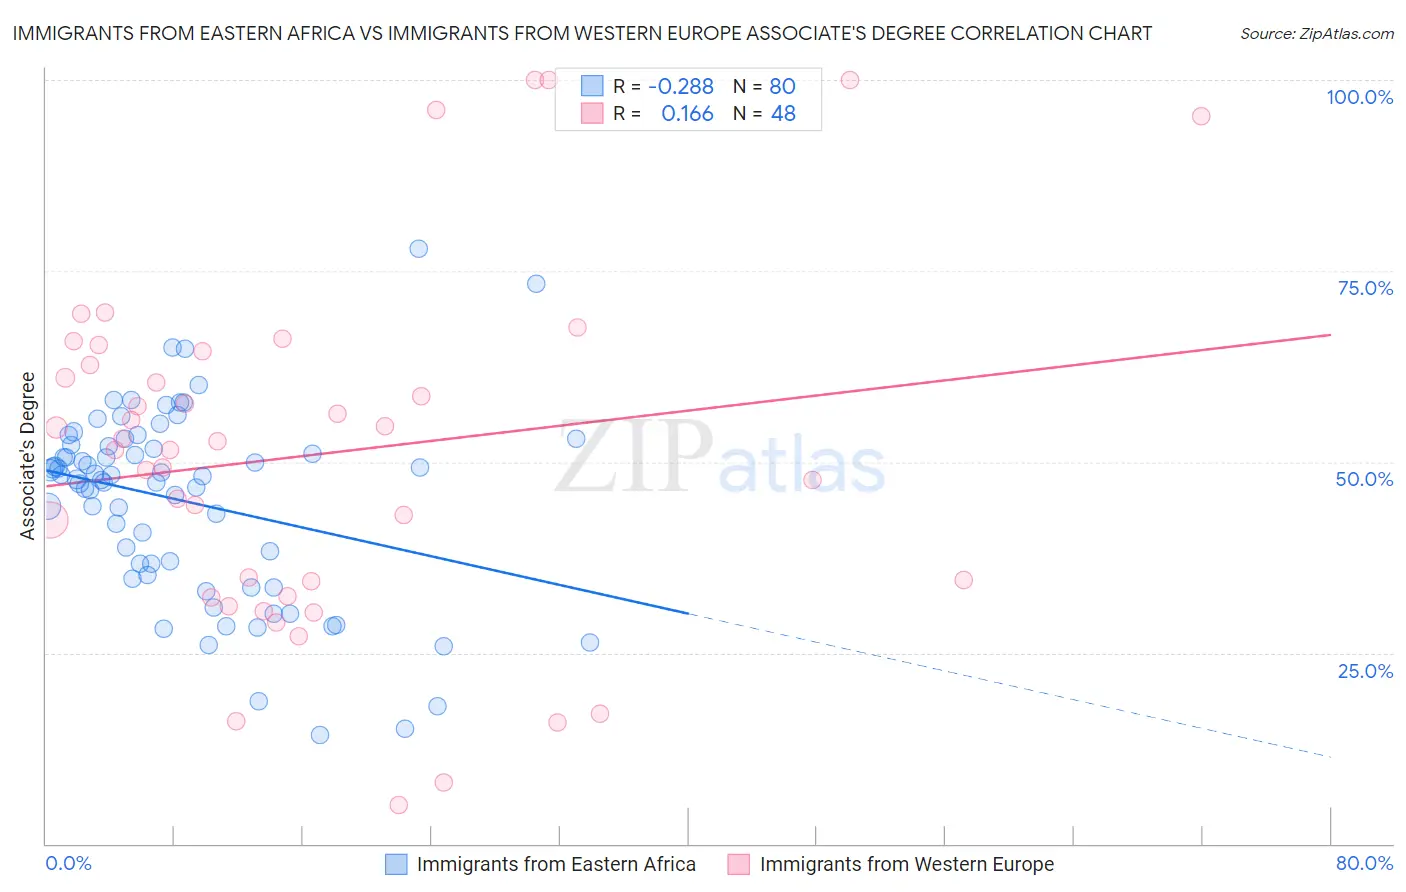 Immigrants from Eastern Africa vs Immigrants from Western Europe Associate's Degree